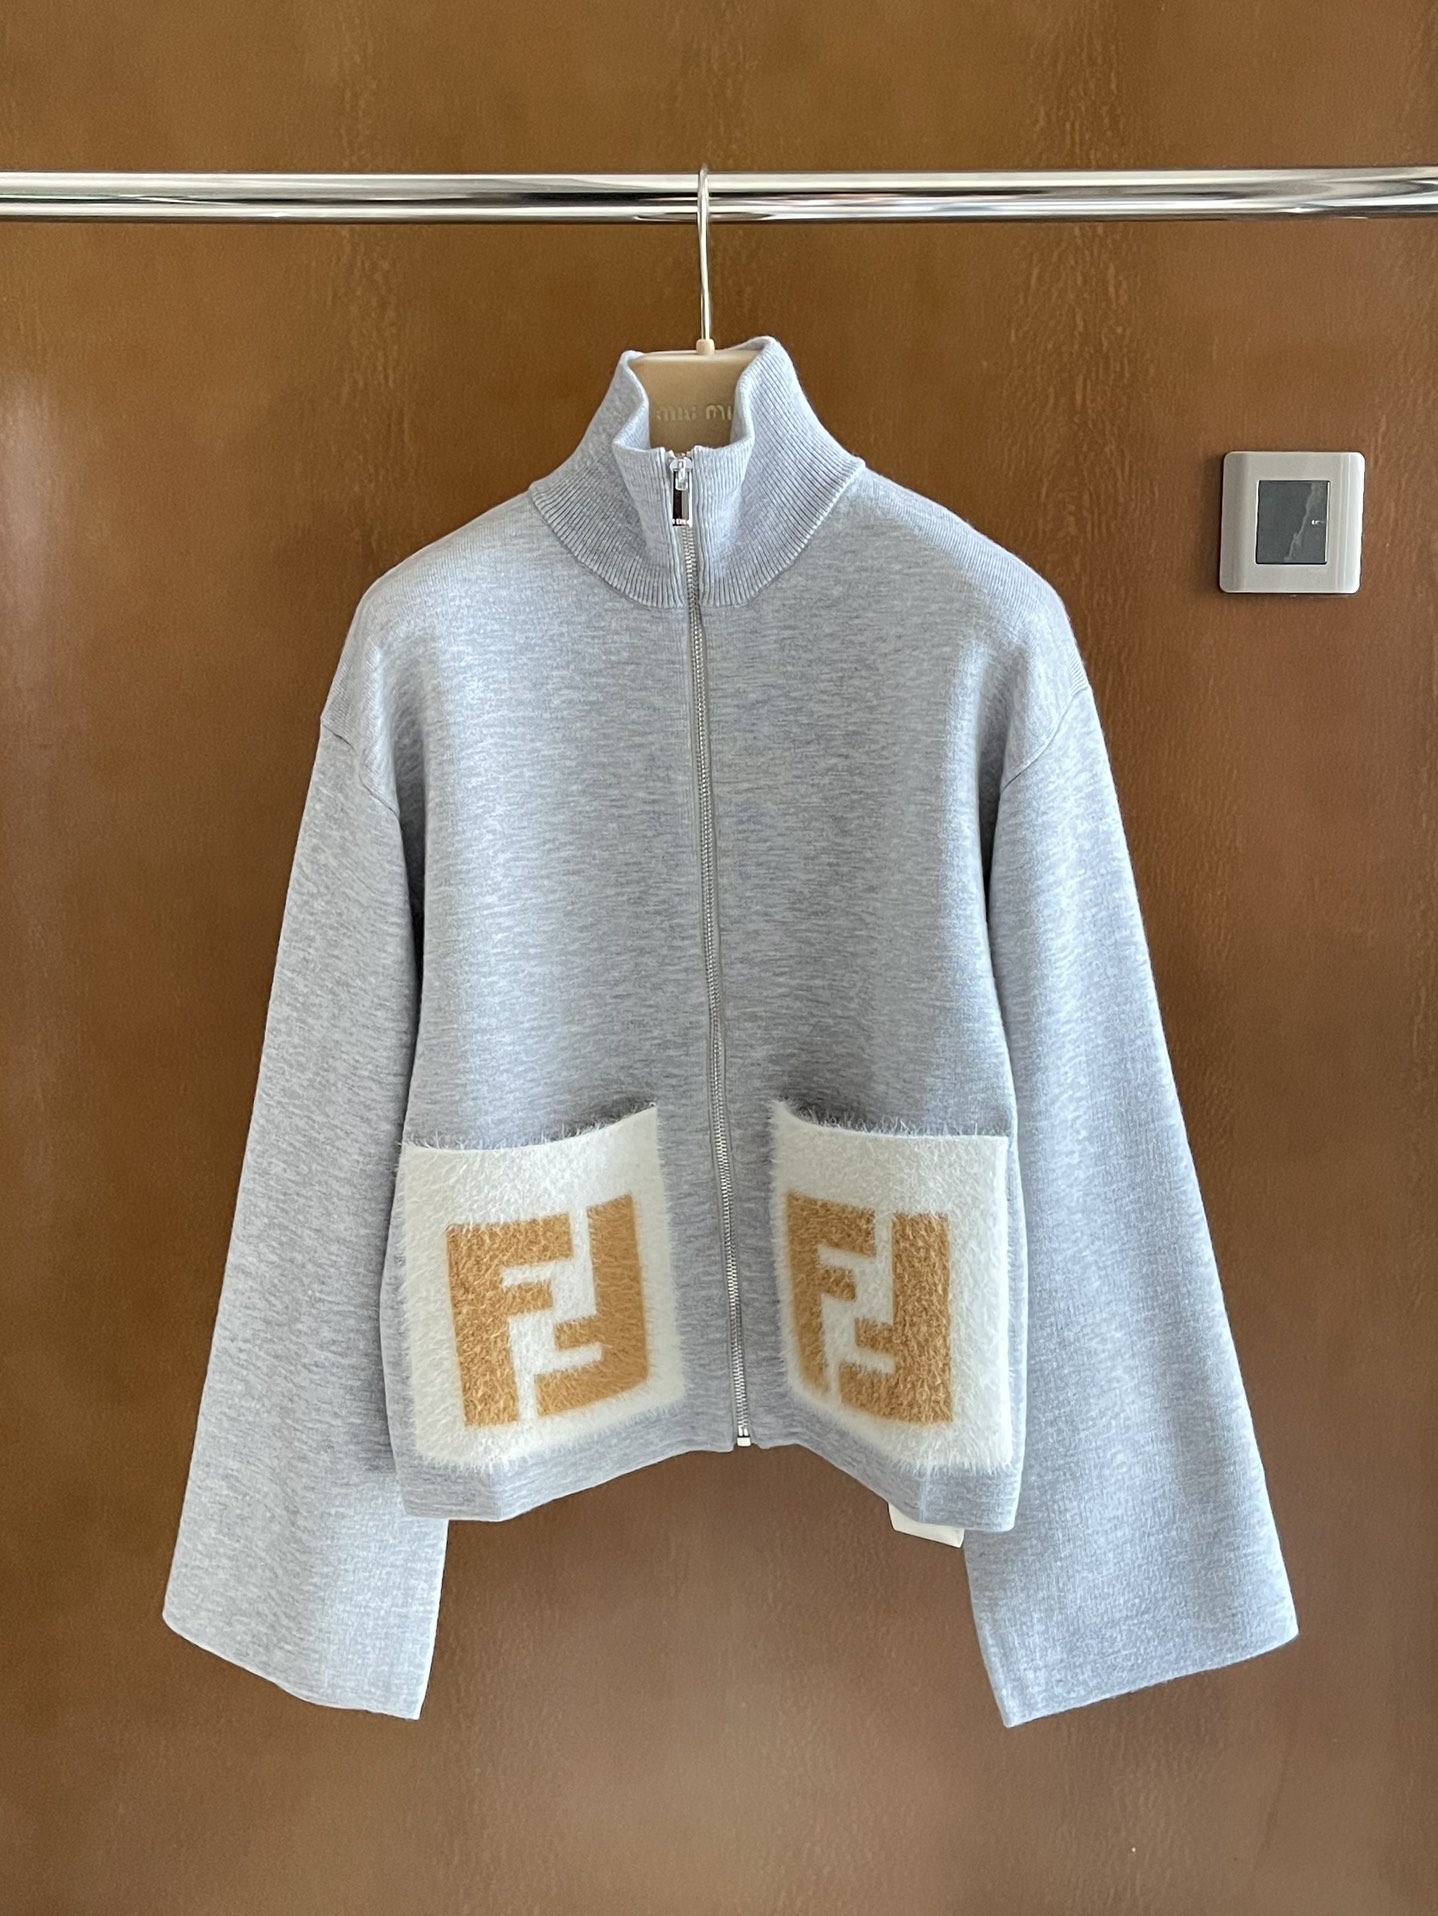 Fendi Clothing Cardigans Knit Sweater Shop Designer Replica
 Knitting Fall Collection Vintage